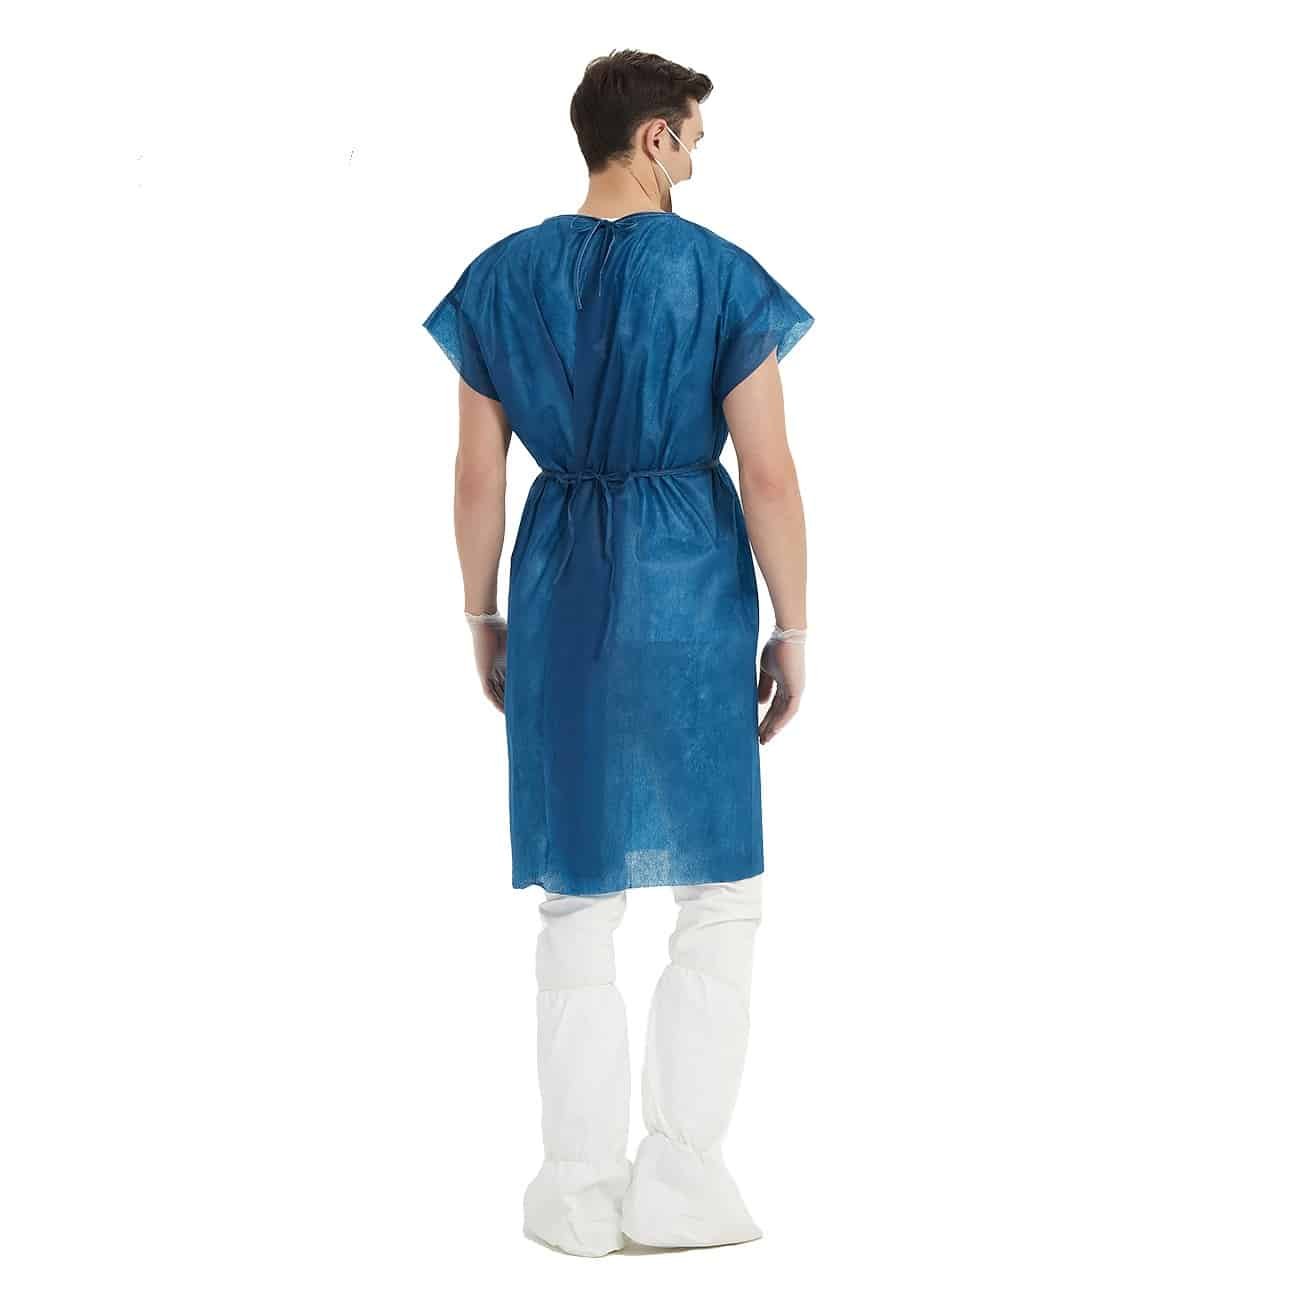 Surgical Disposable Hospital Apparel Manufacturing Industry